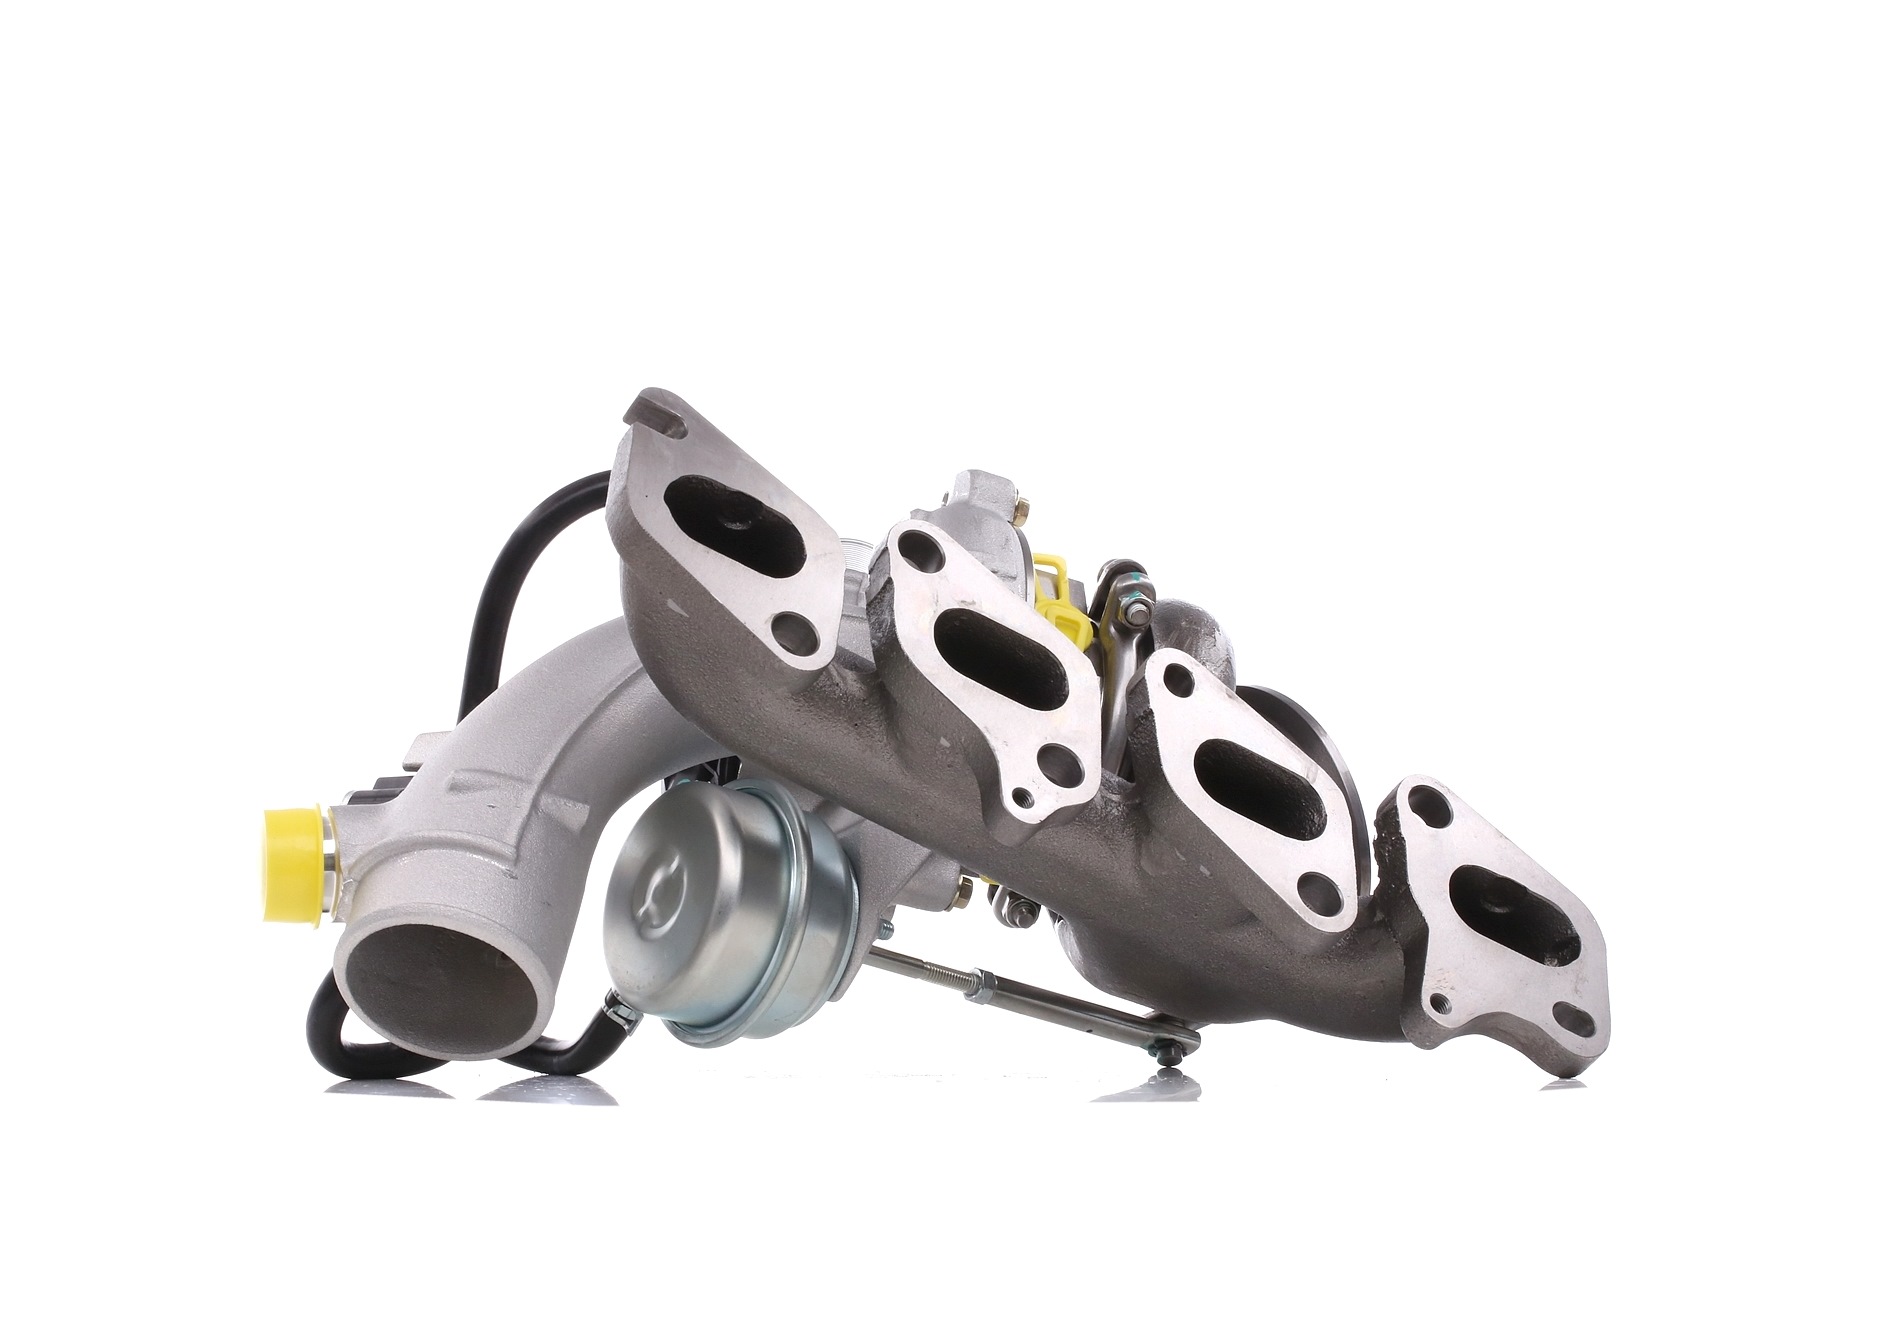 Image of RIDEX Turbocharger OPEL,CHEVROLET 2234C0372 0860156,55565353,860156 Turbolader,Charger, charging system